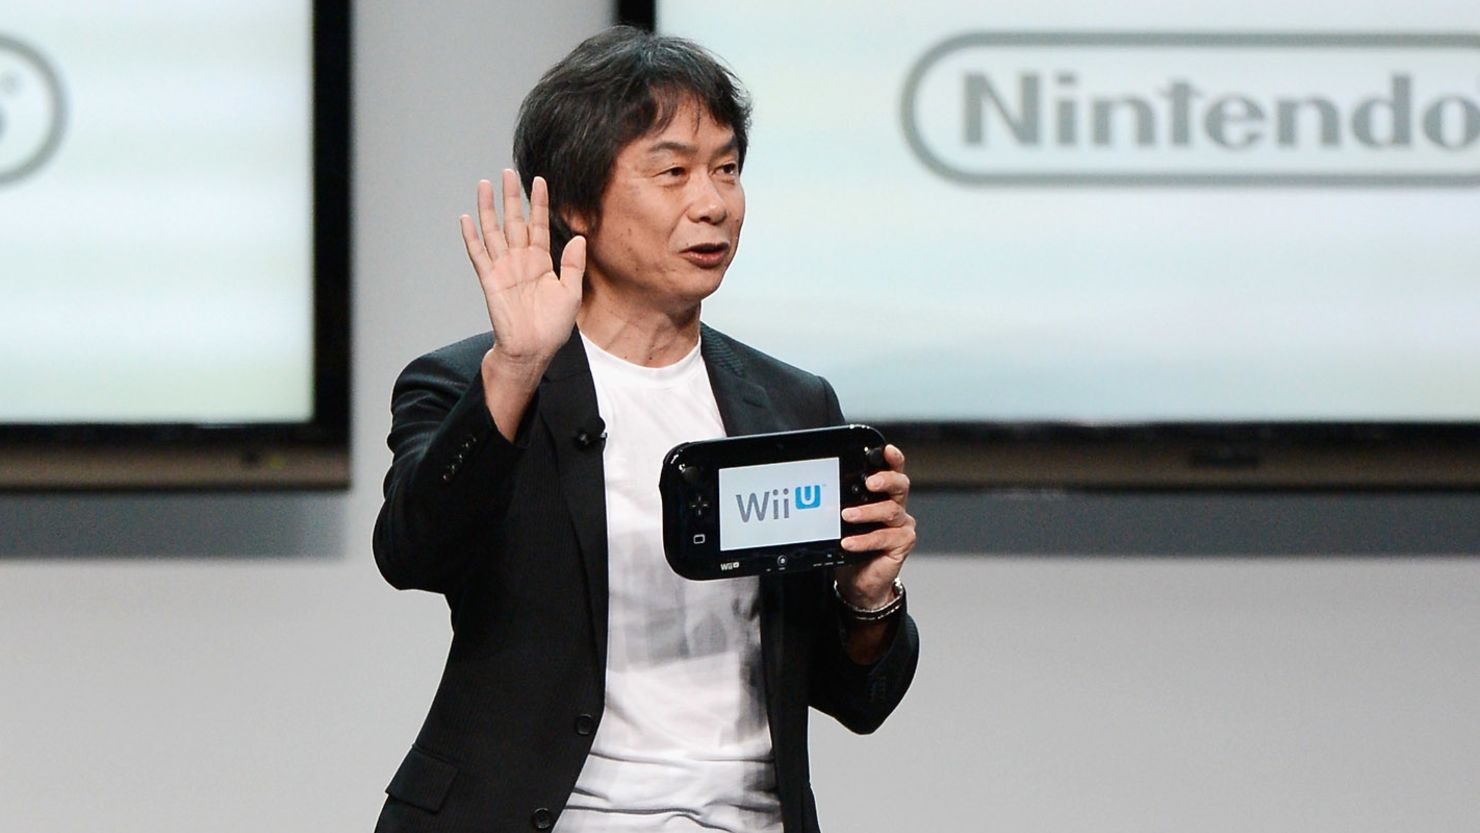 Nintendo producer Shigeru Miyamoto discusses the Wii U at a press conference Tuesday in Los Angeles.